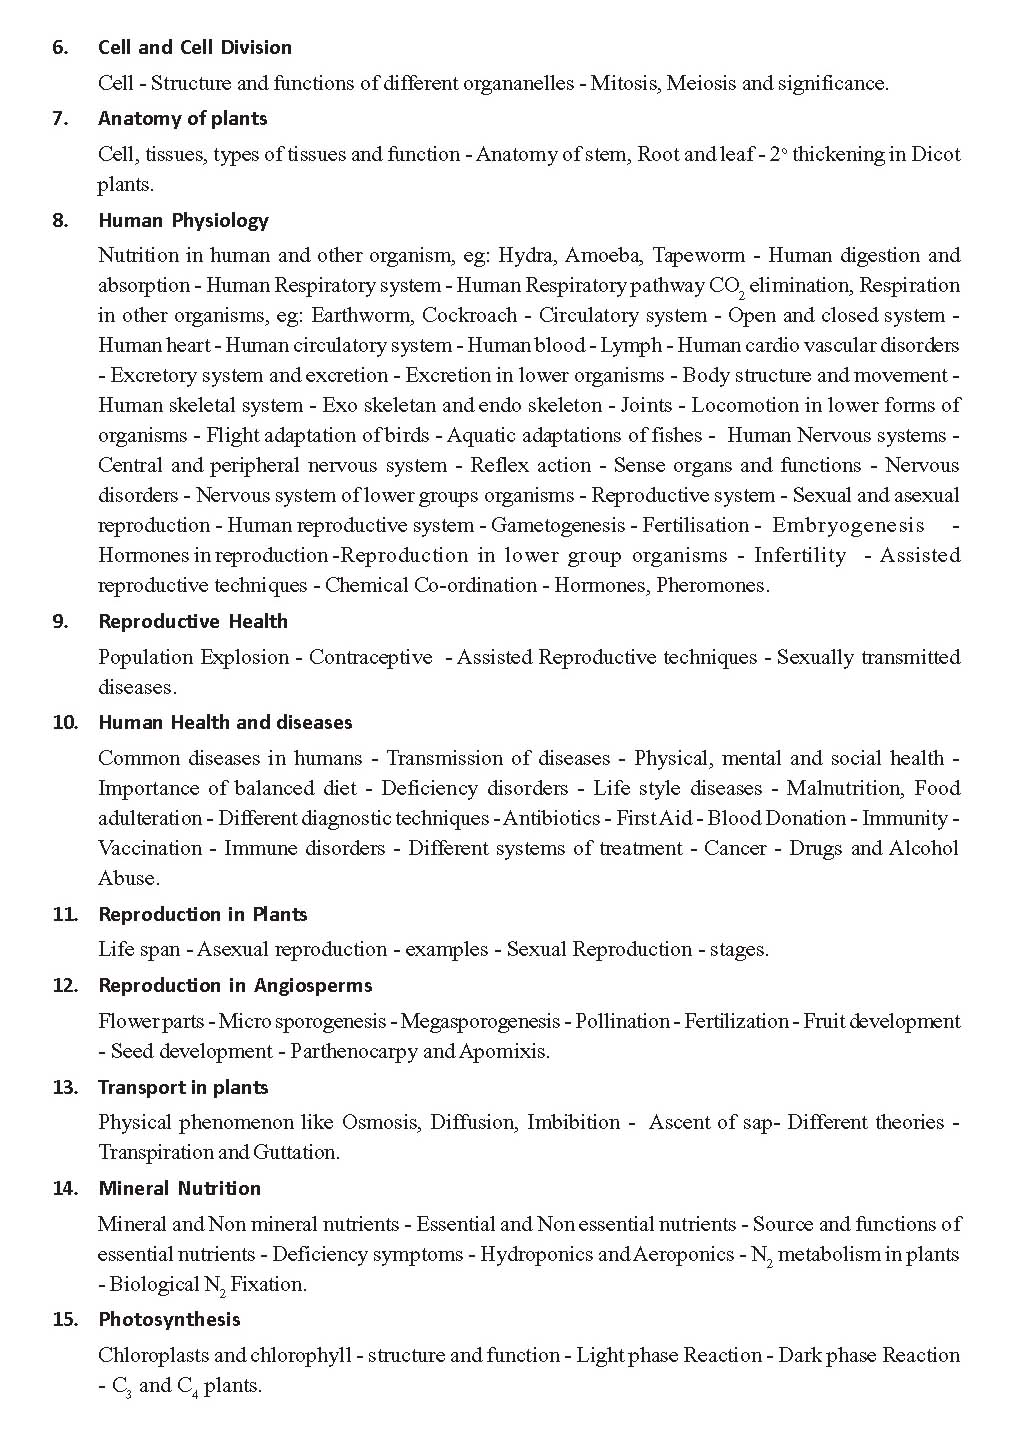 KTET Exam Syllabus for Category III Paper III Examination of The Year 2012 18